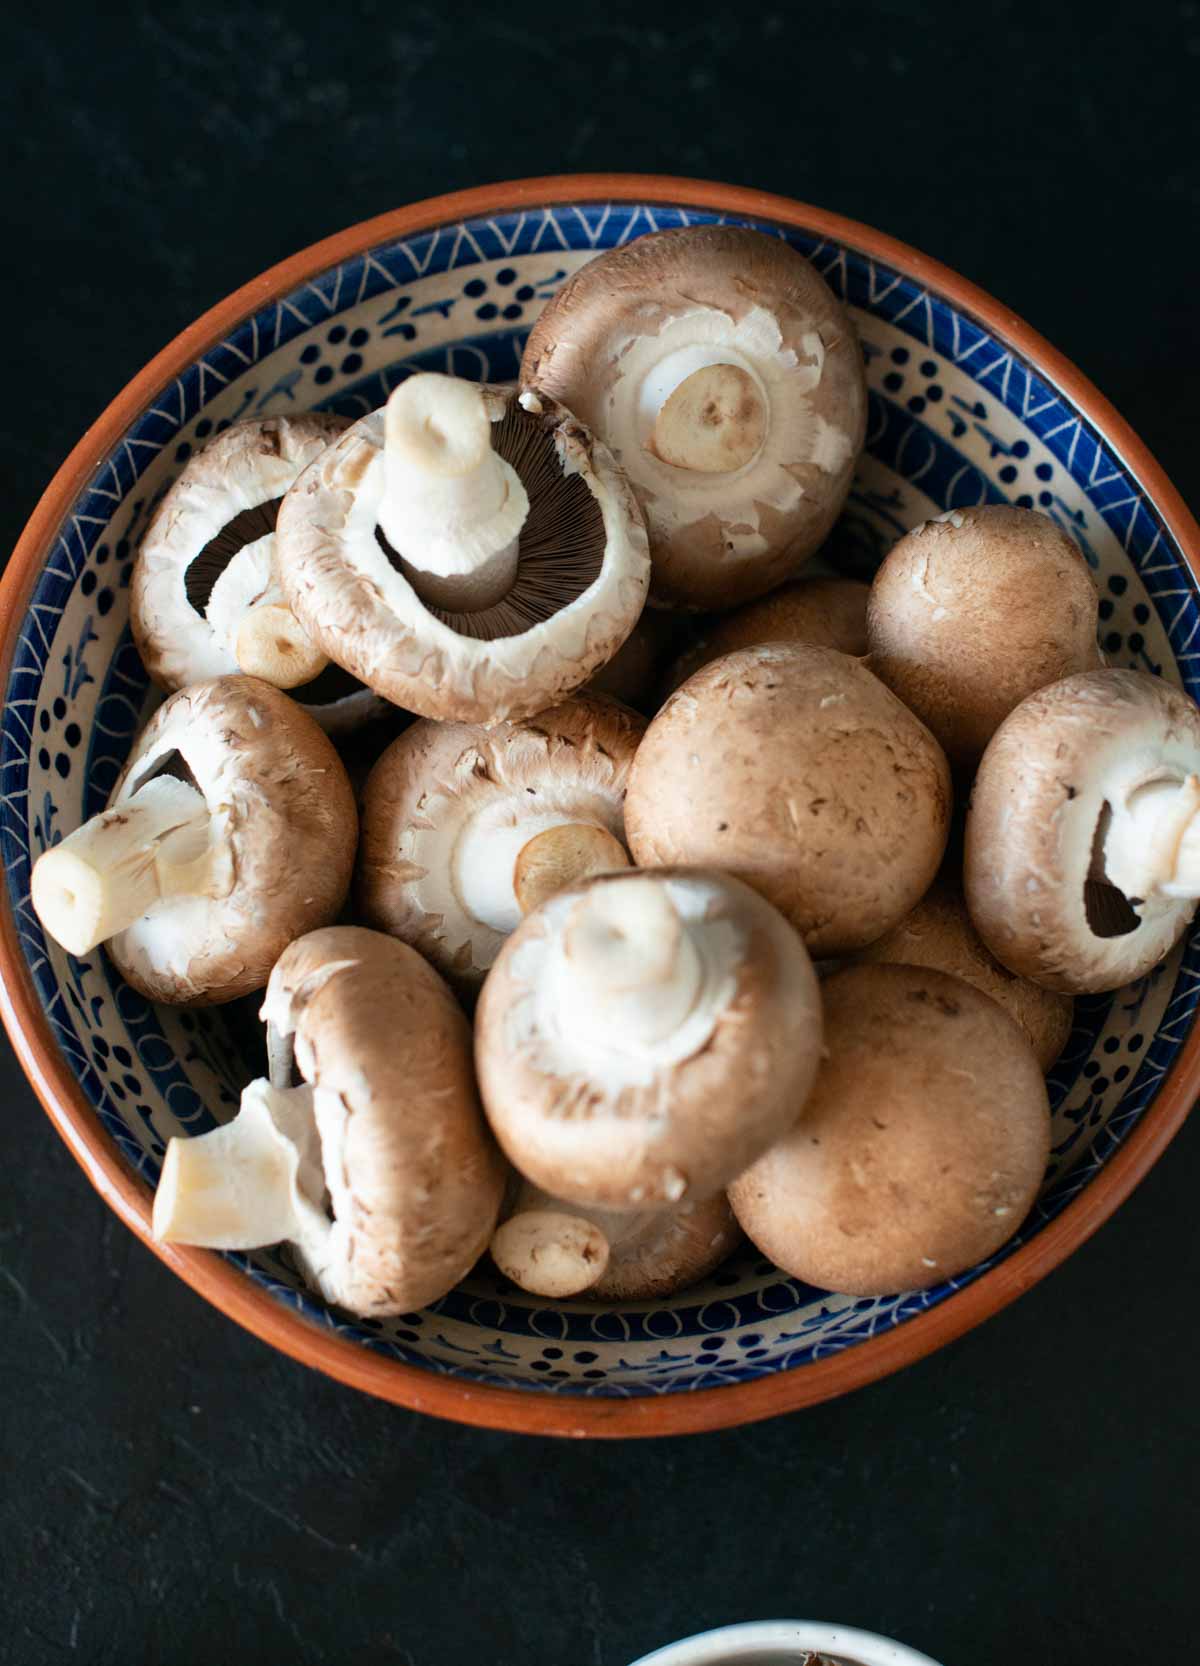 champignons in a bowl